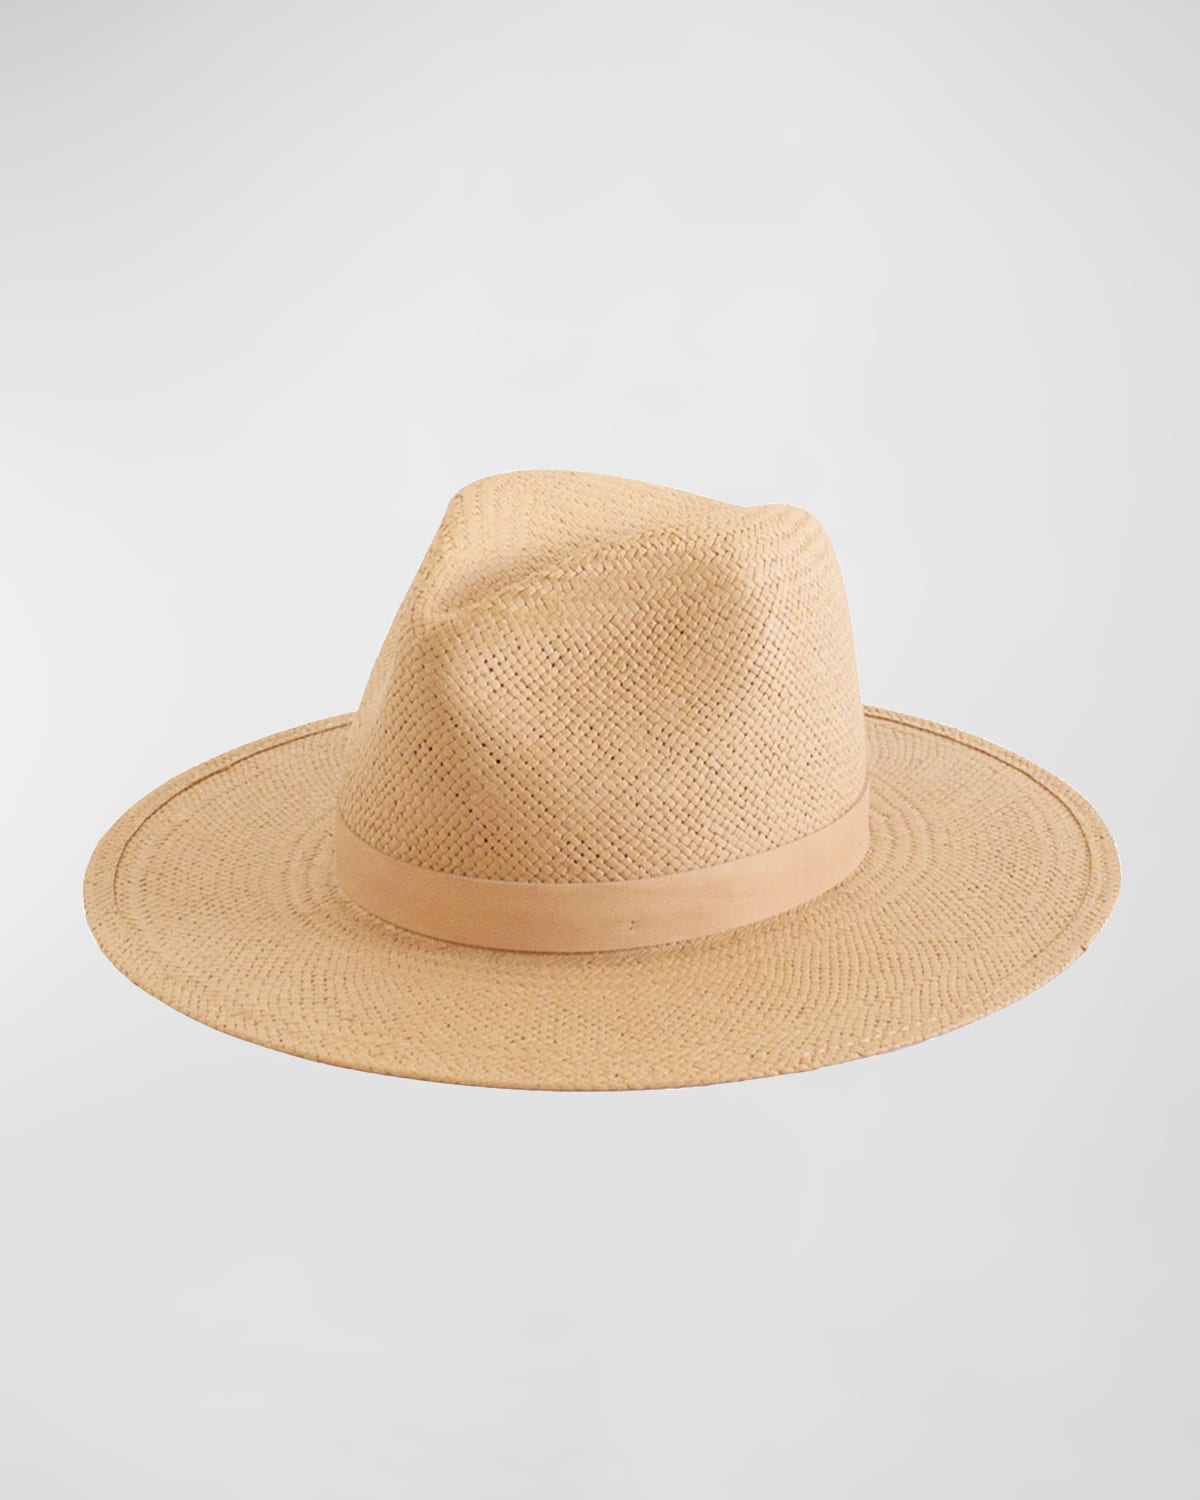 Janessa Leone Simone Packable Straw Fedora Hat In Sand